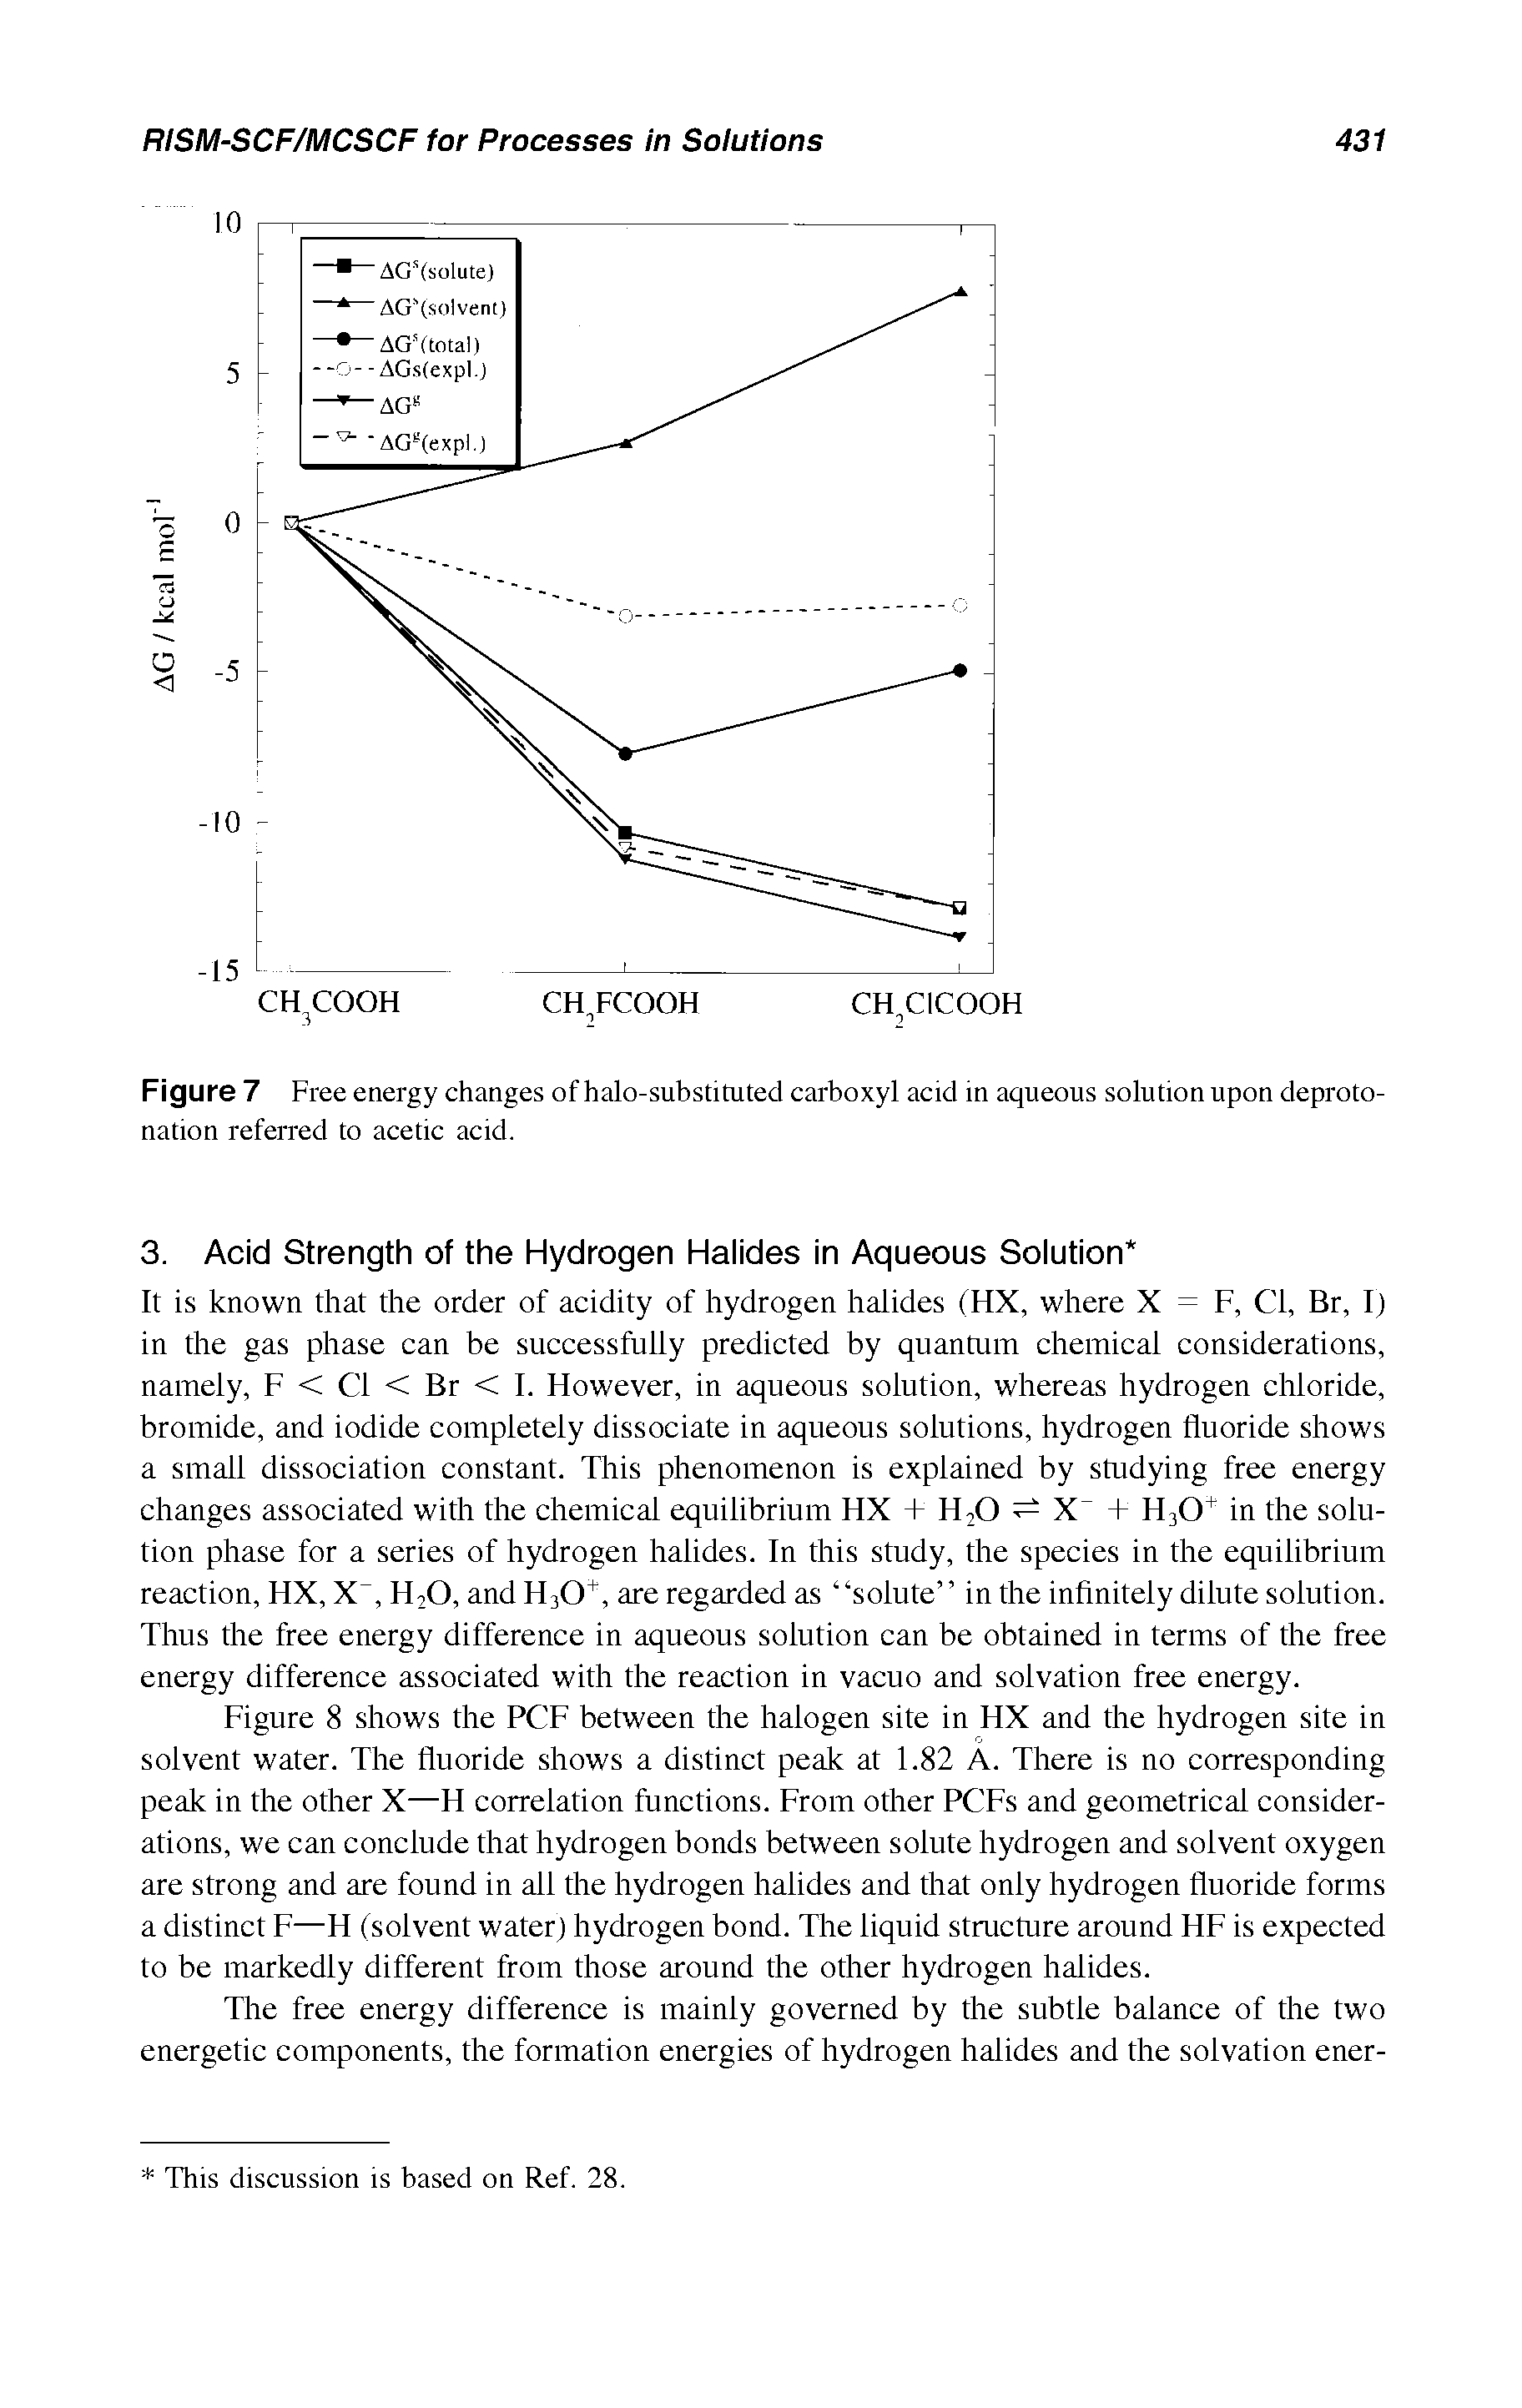 Figure 7 Free energy changes of halo-substituted carboxyl acid in aqueous solution upon deproto-nation referred to acetic acid.